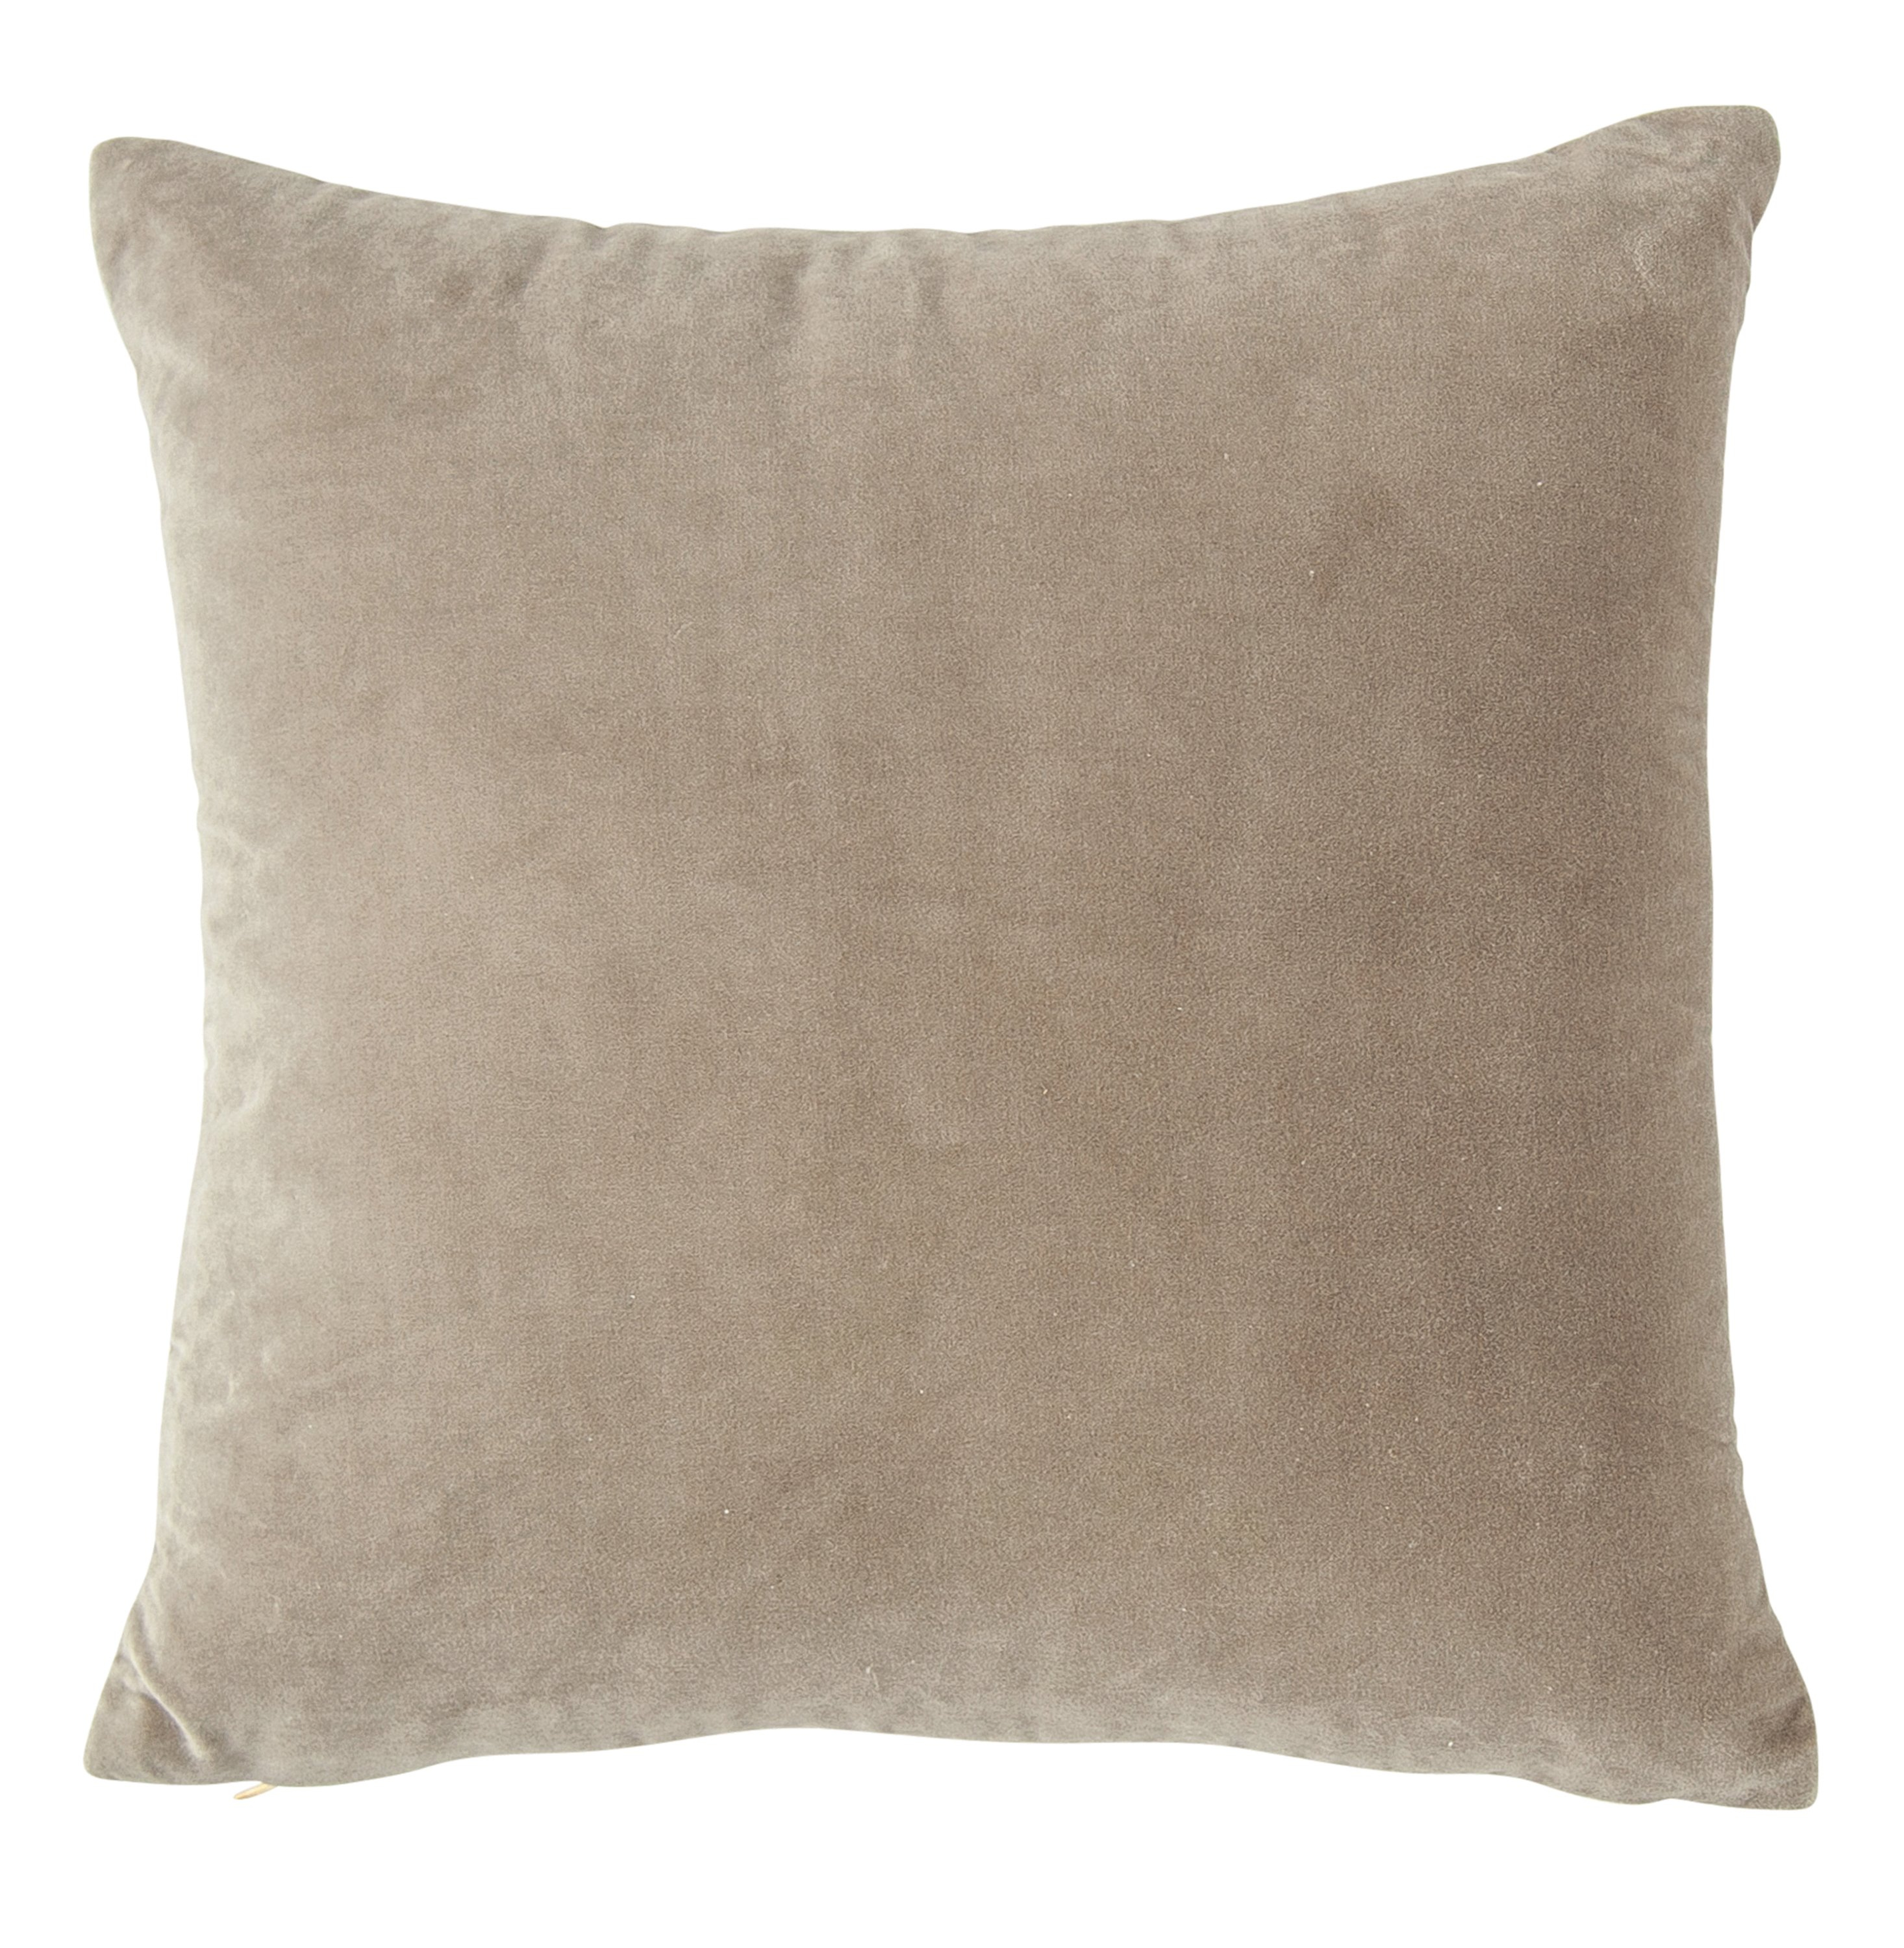 Square Grey Cotton Velvet Pillow with Cream Back - Nomad Home